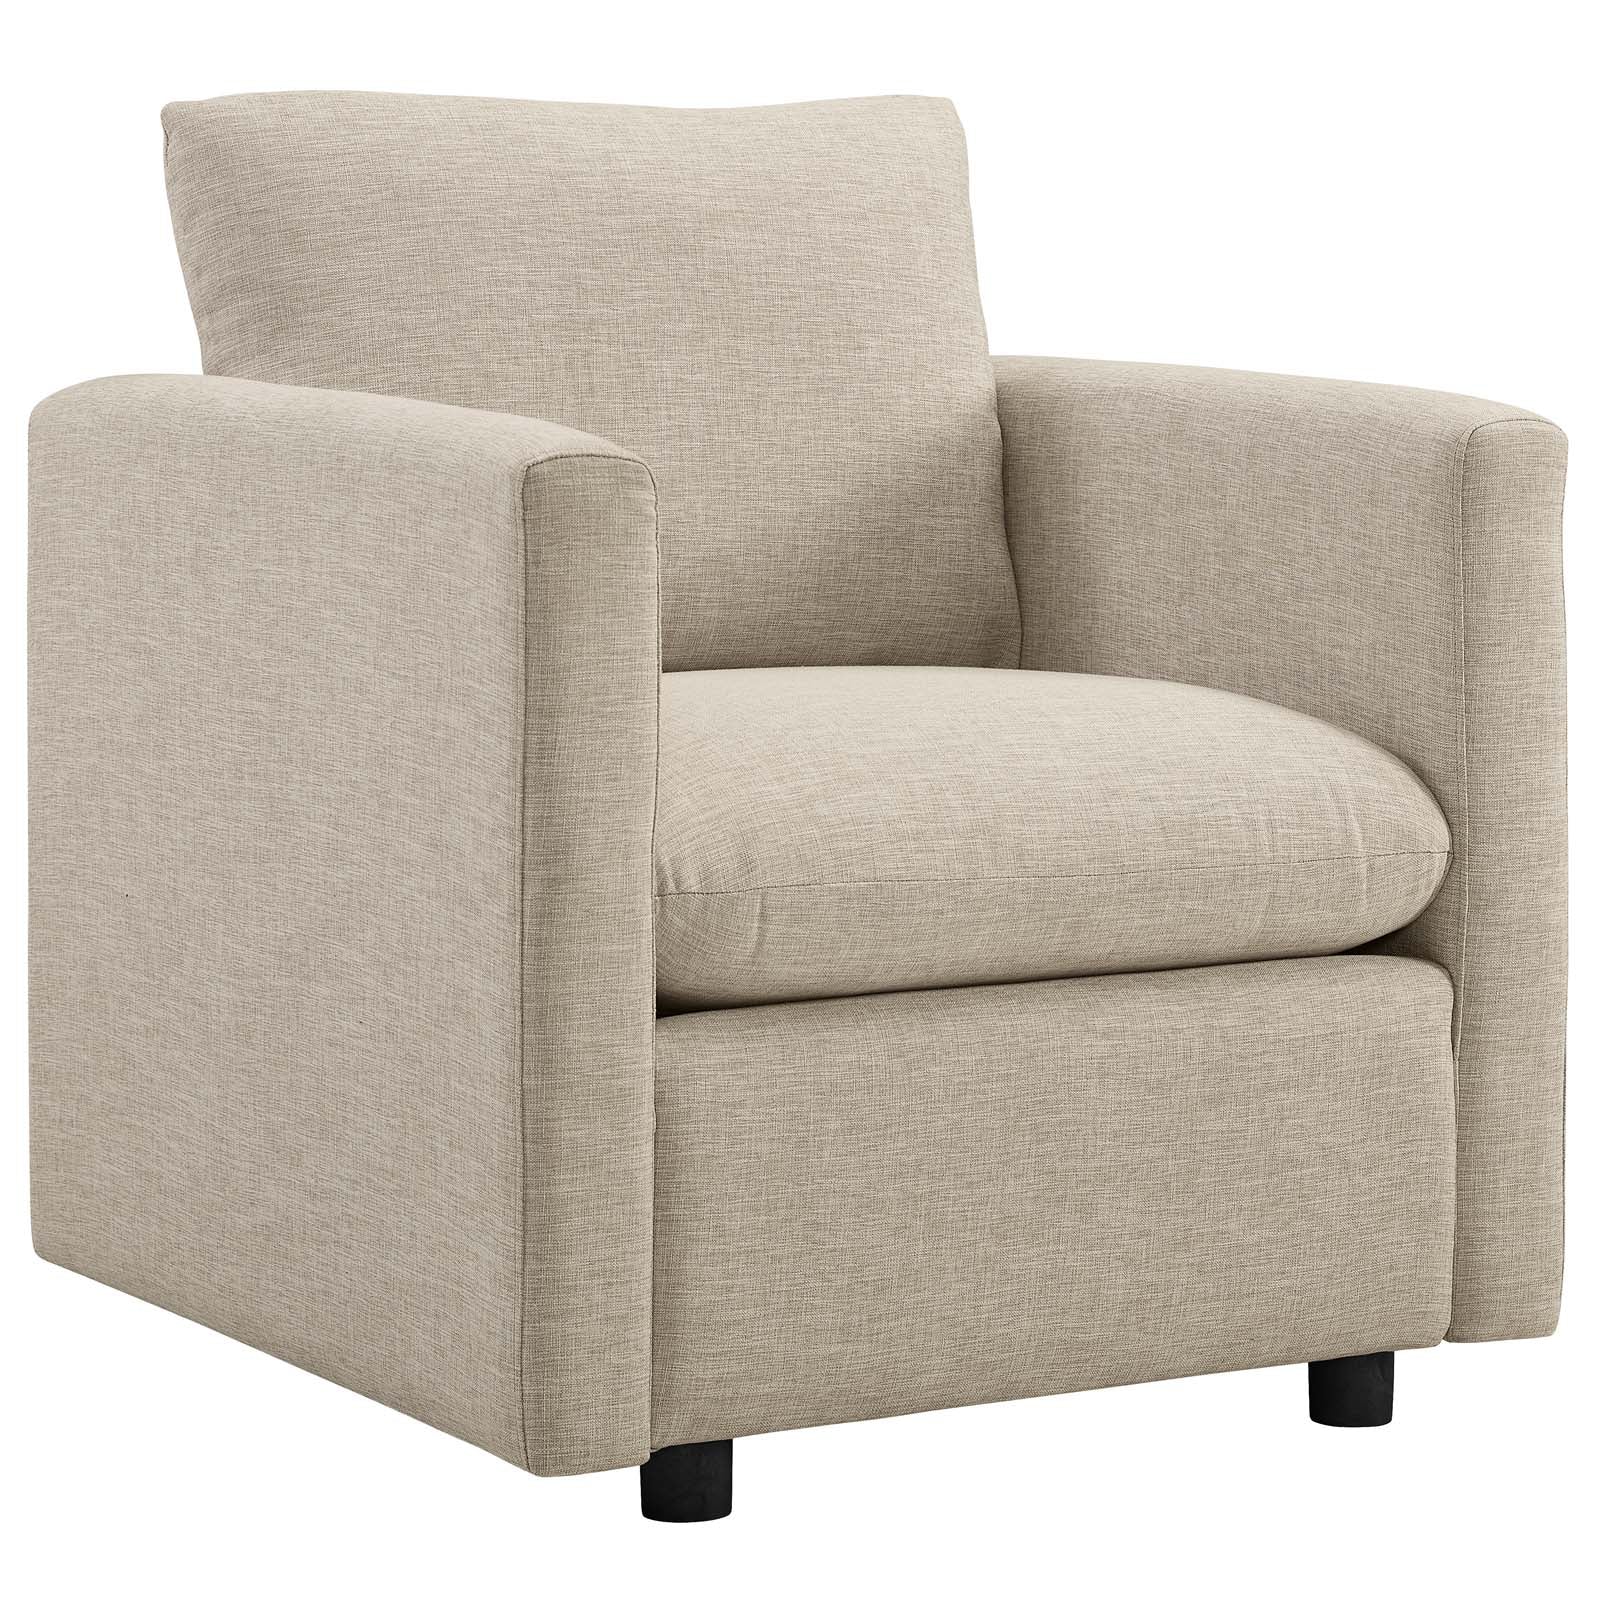 Activate 3 Piece Upholstered Fabric Set - East Shore Modern Home Furnishings